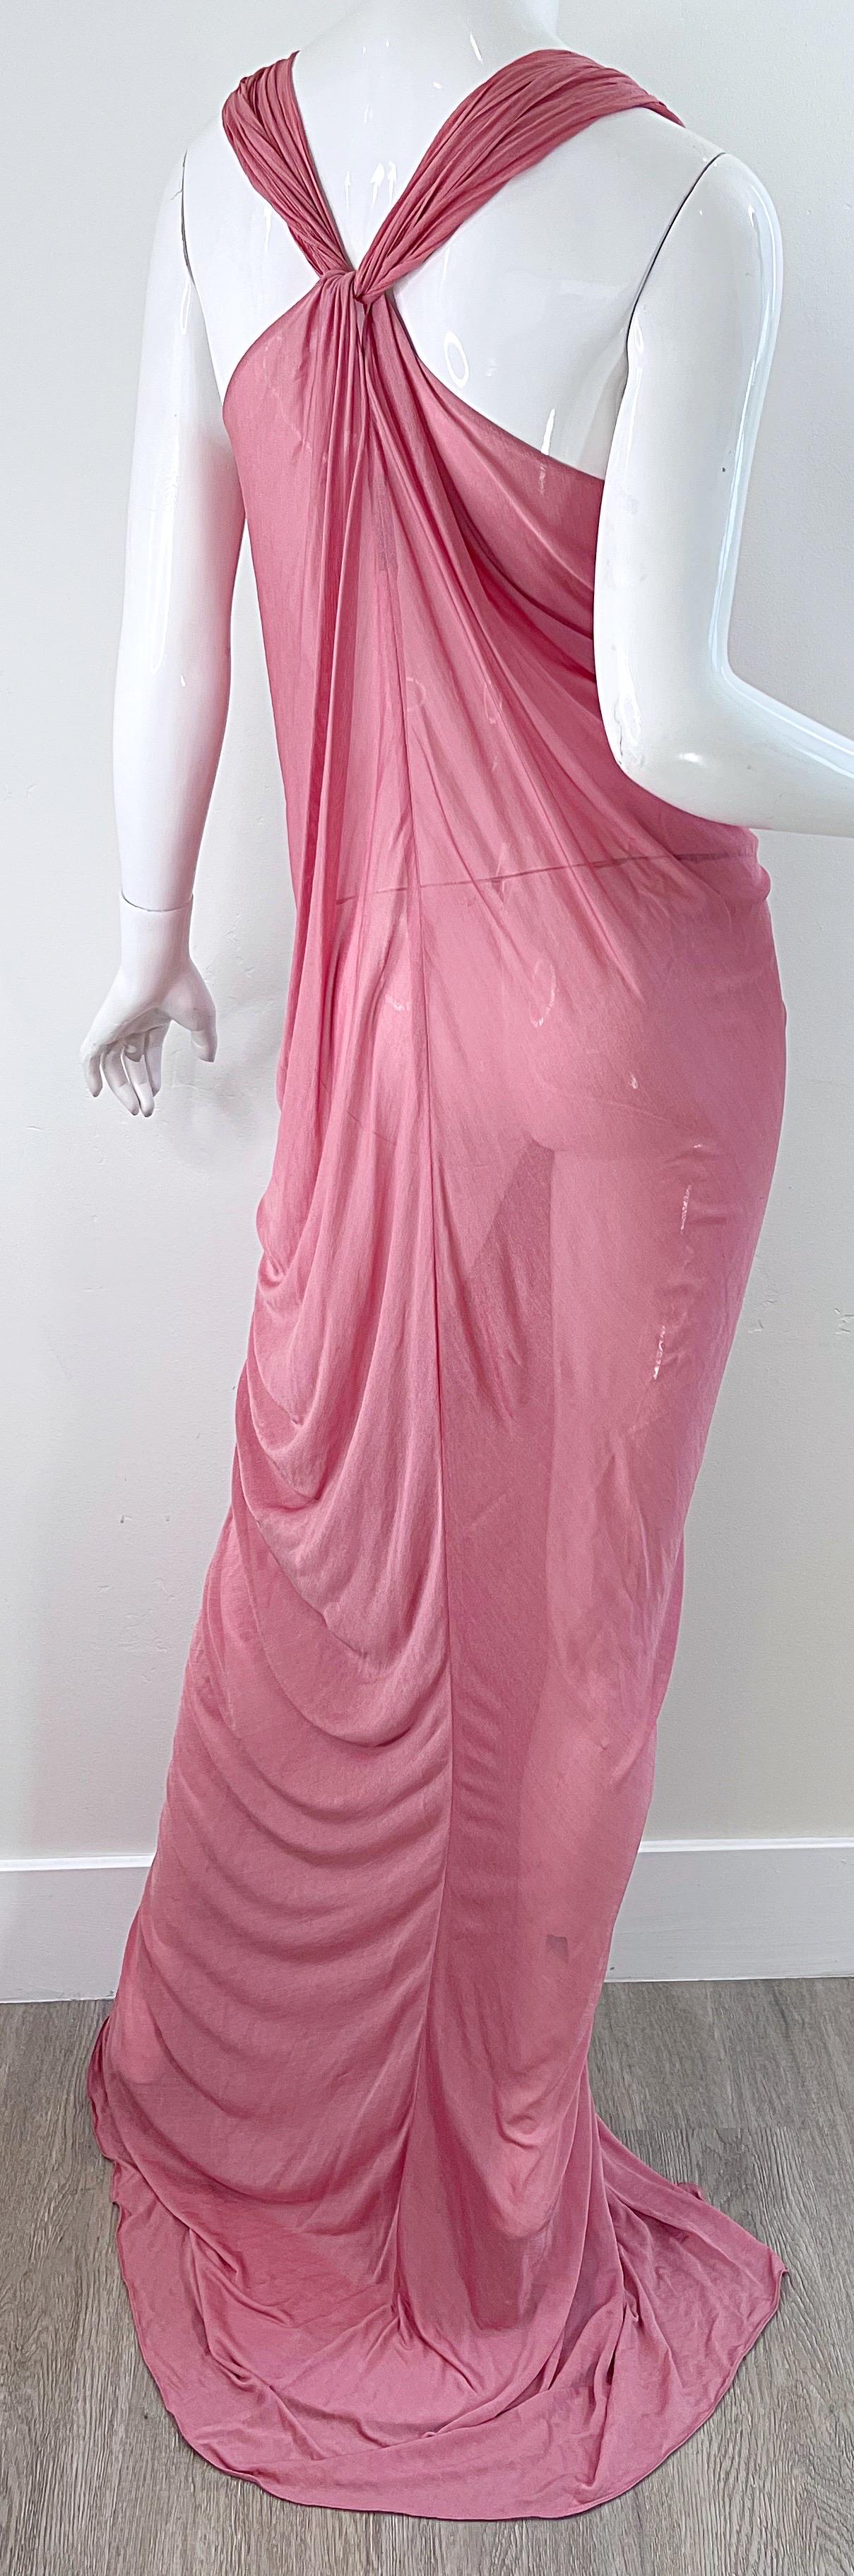 NWT Donna Karan Fall 2005 Pink Dusty Rose Mauve 30s Style Semi Sheer Gown Dress For Sale 6